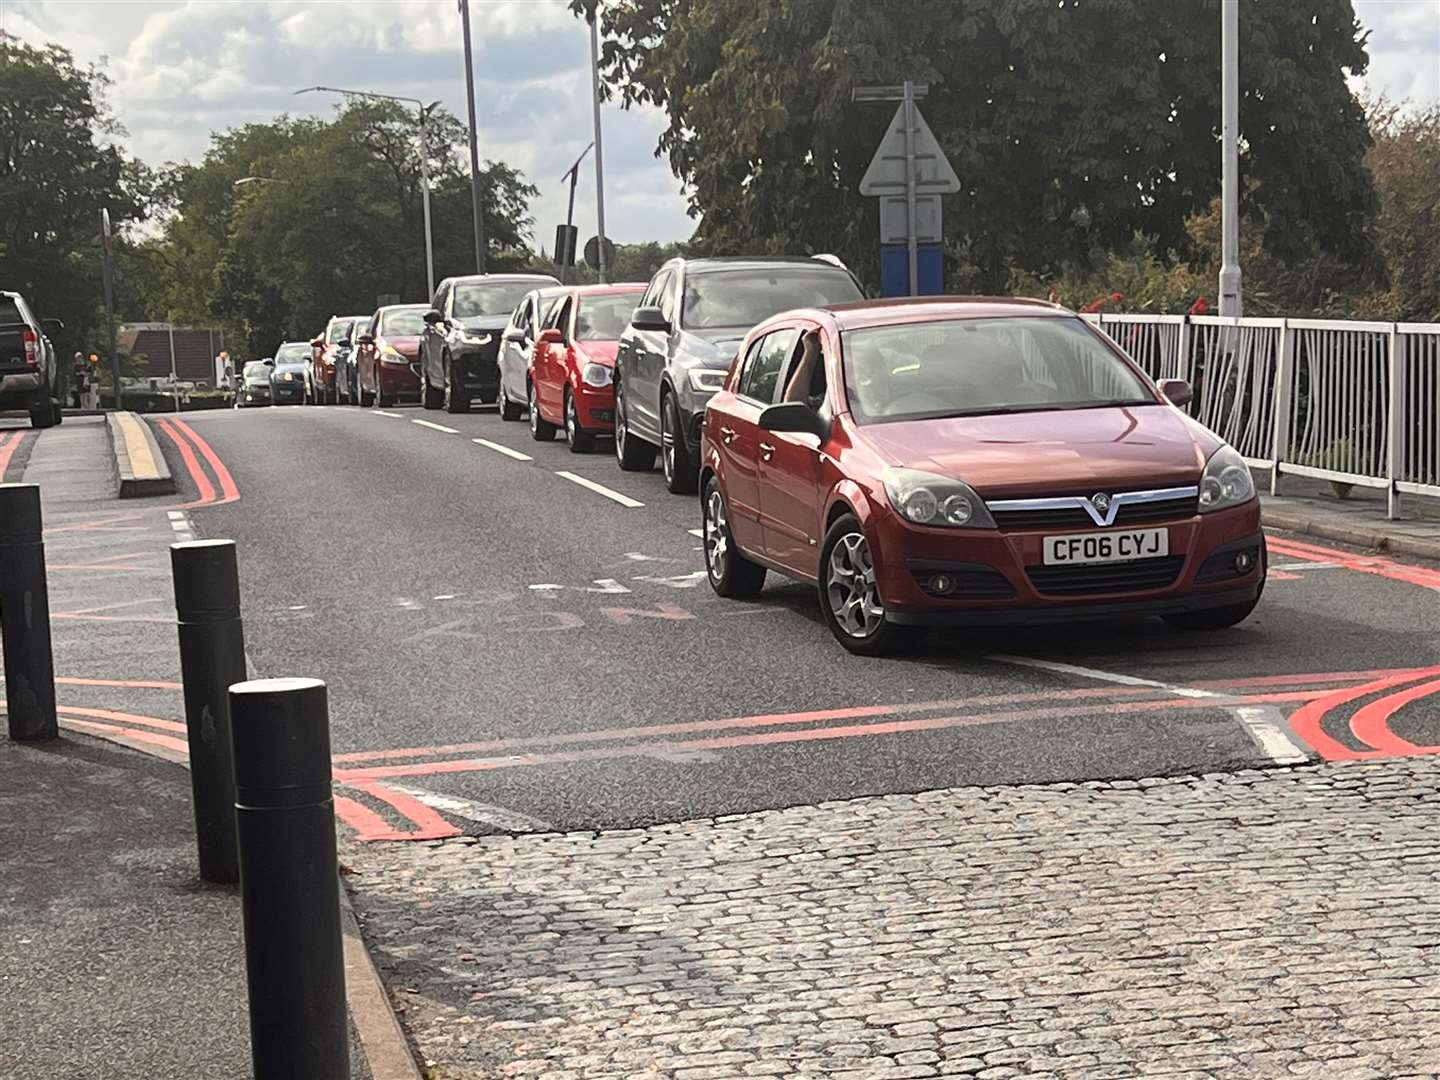 About 20 to 25 cars were seen waiting at the William Harvey on Tuesday. Picture: Steve Salter